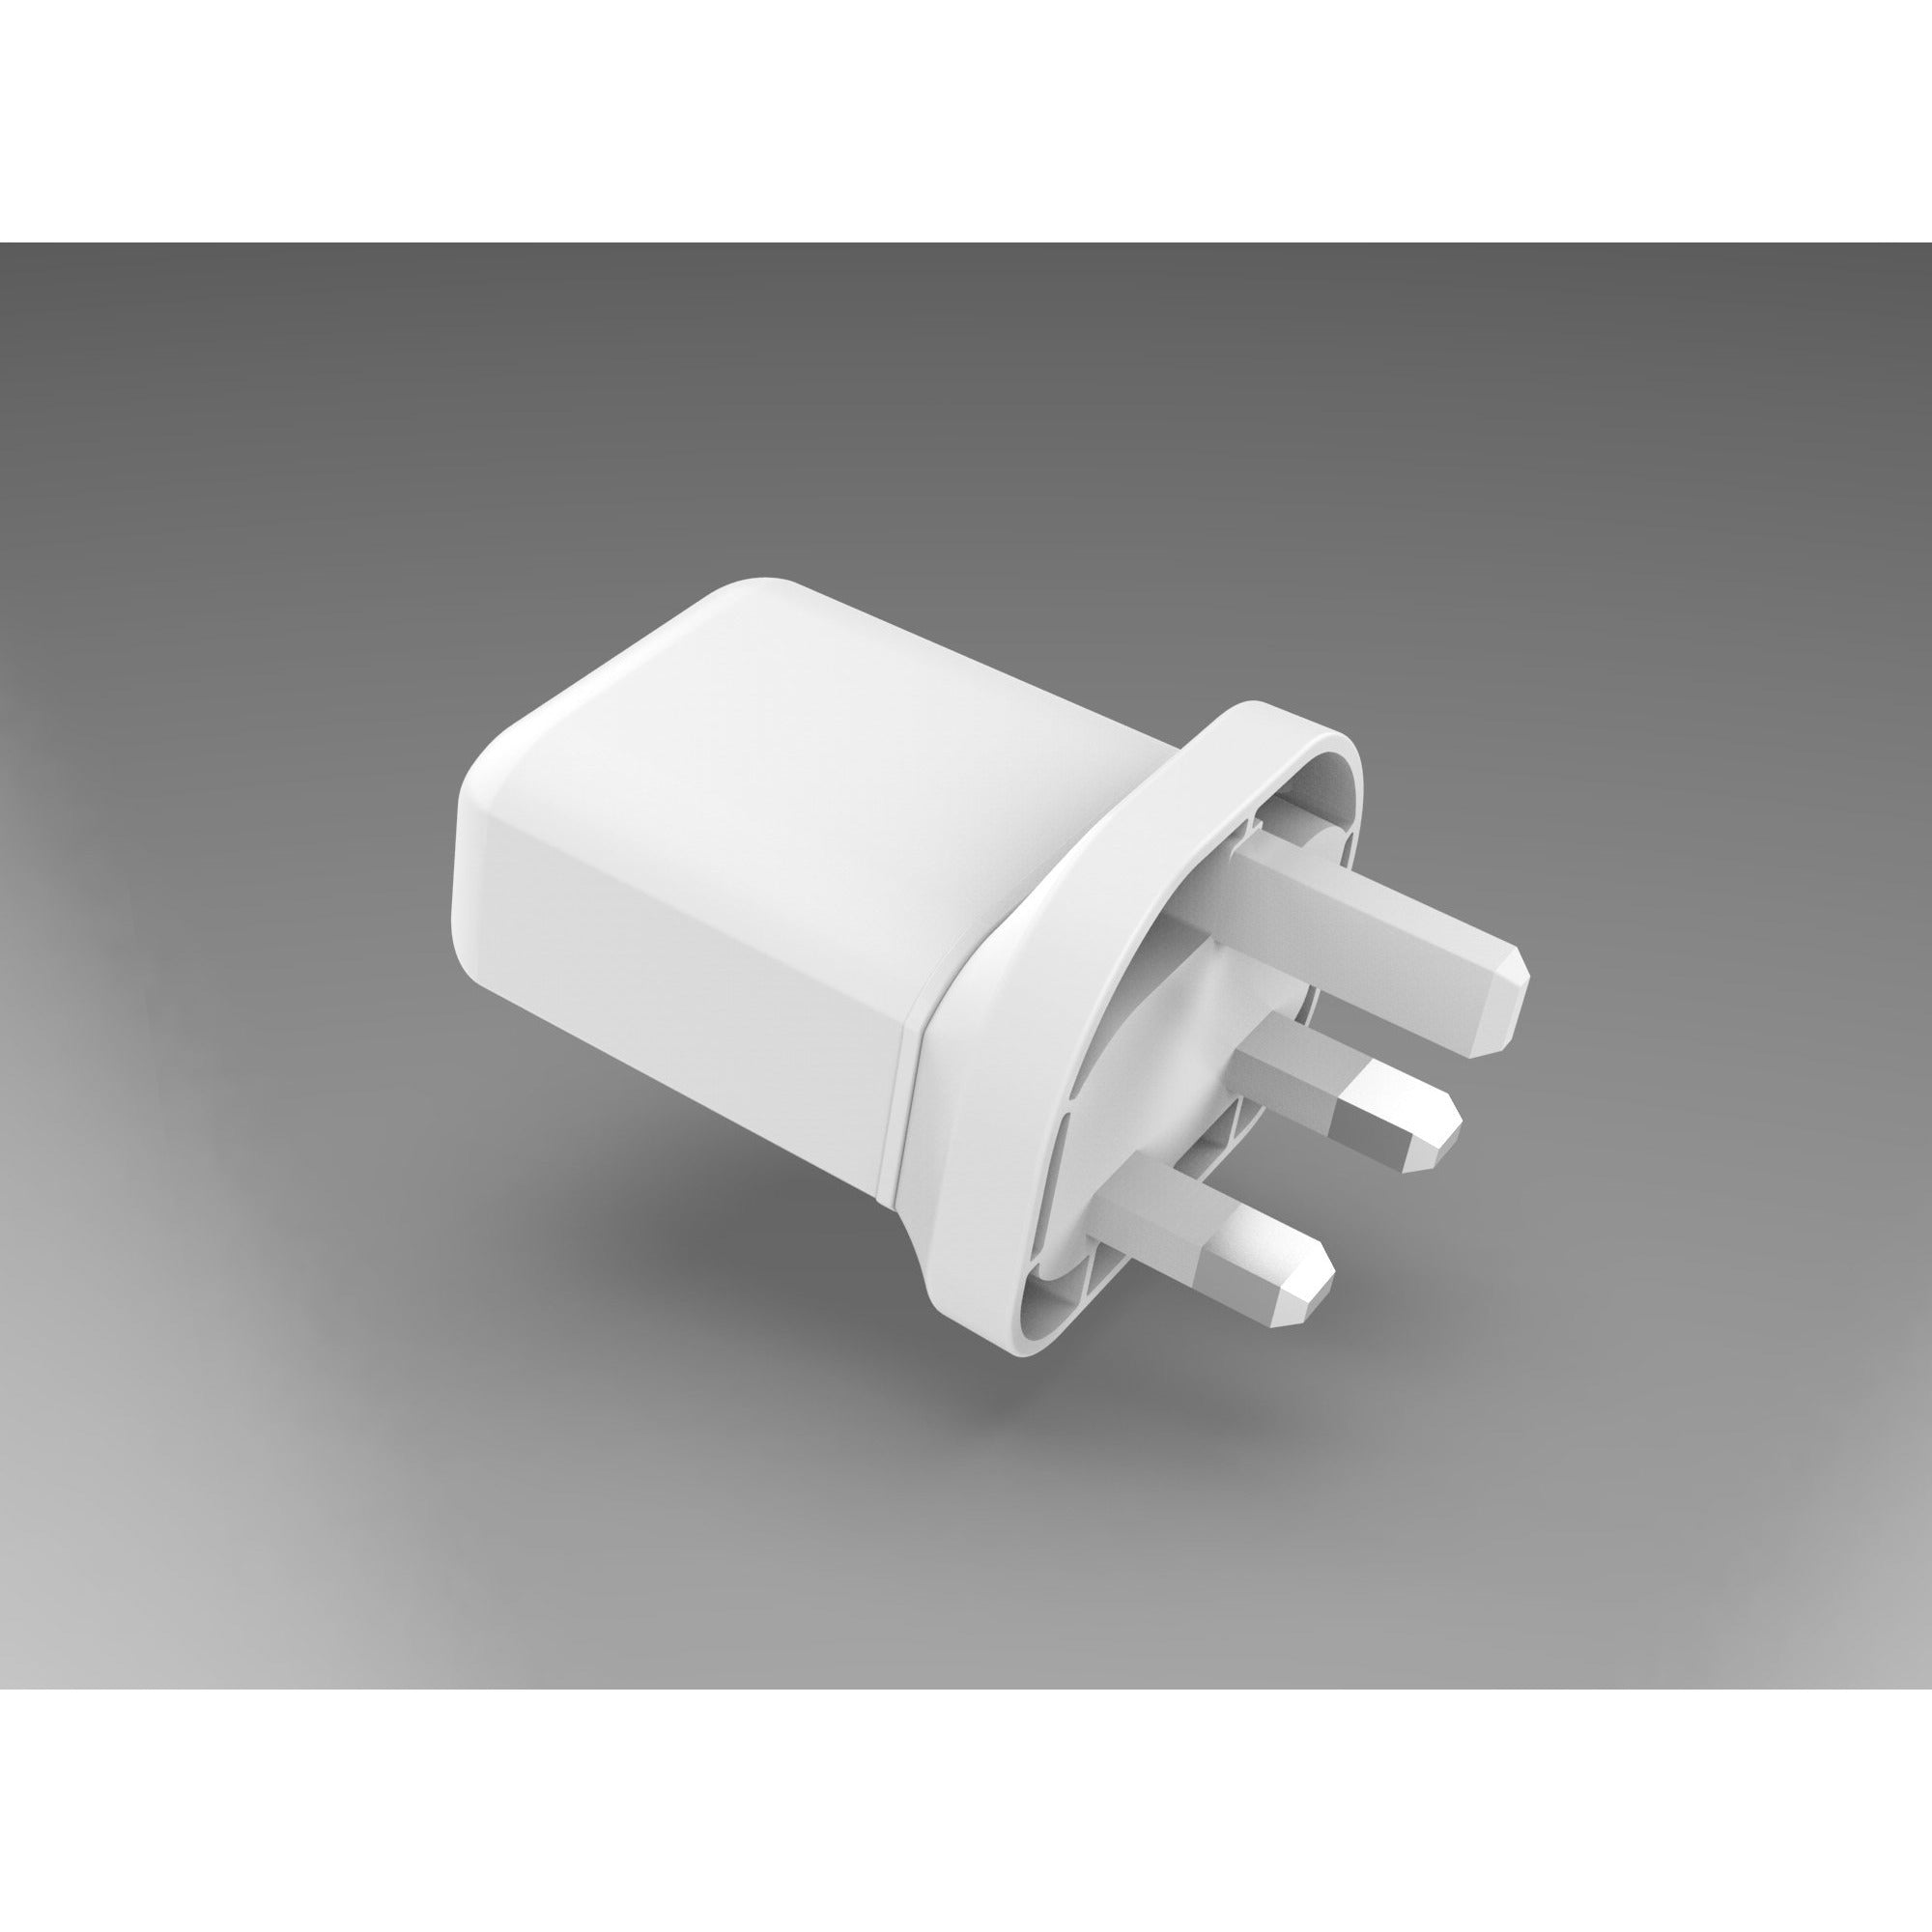 3.0 USB Plug CE Certified Charger Adaptor